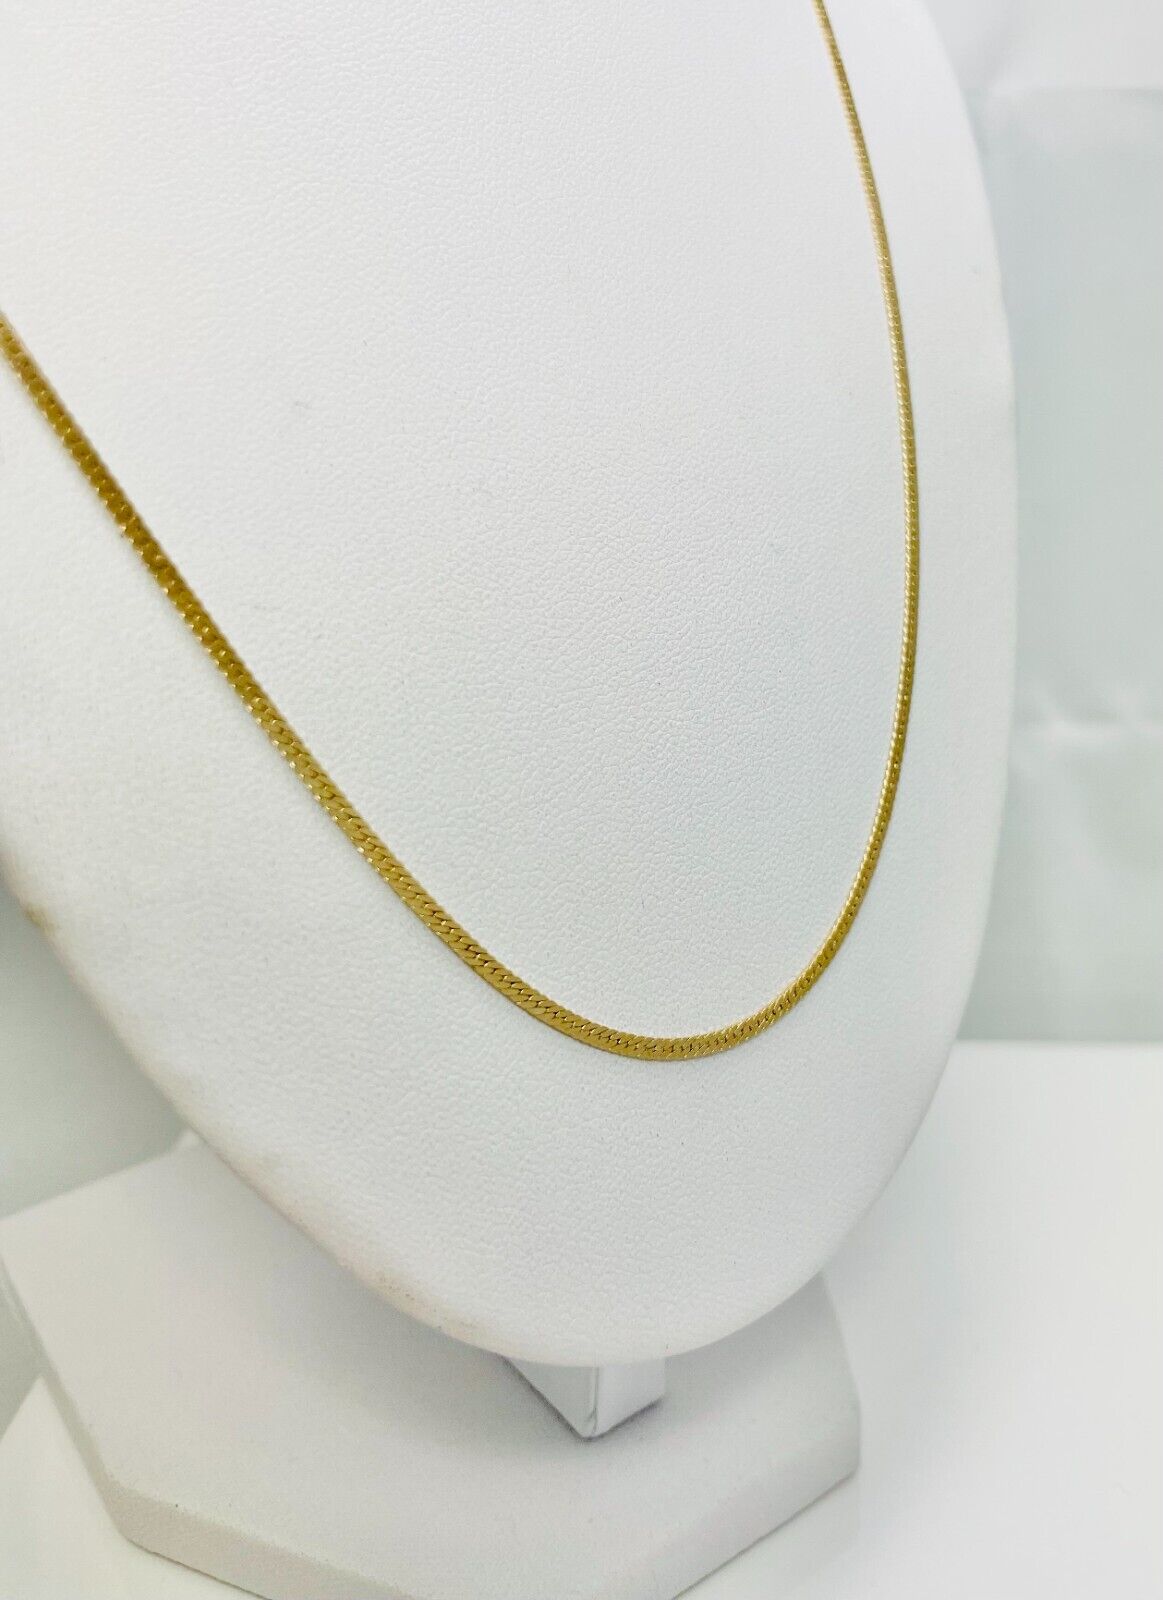 24" Solid 14k Yellow Gold Herringbone Chain Necklace